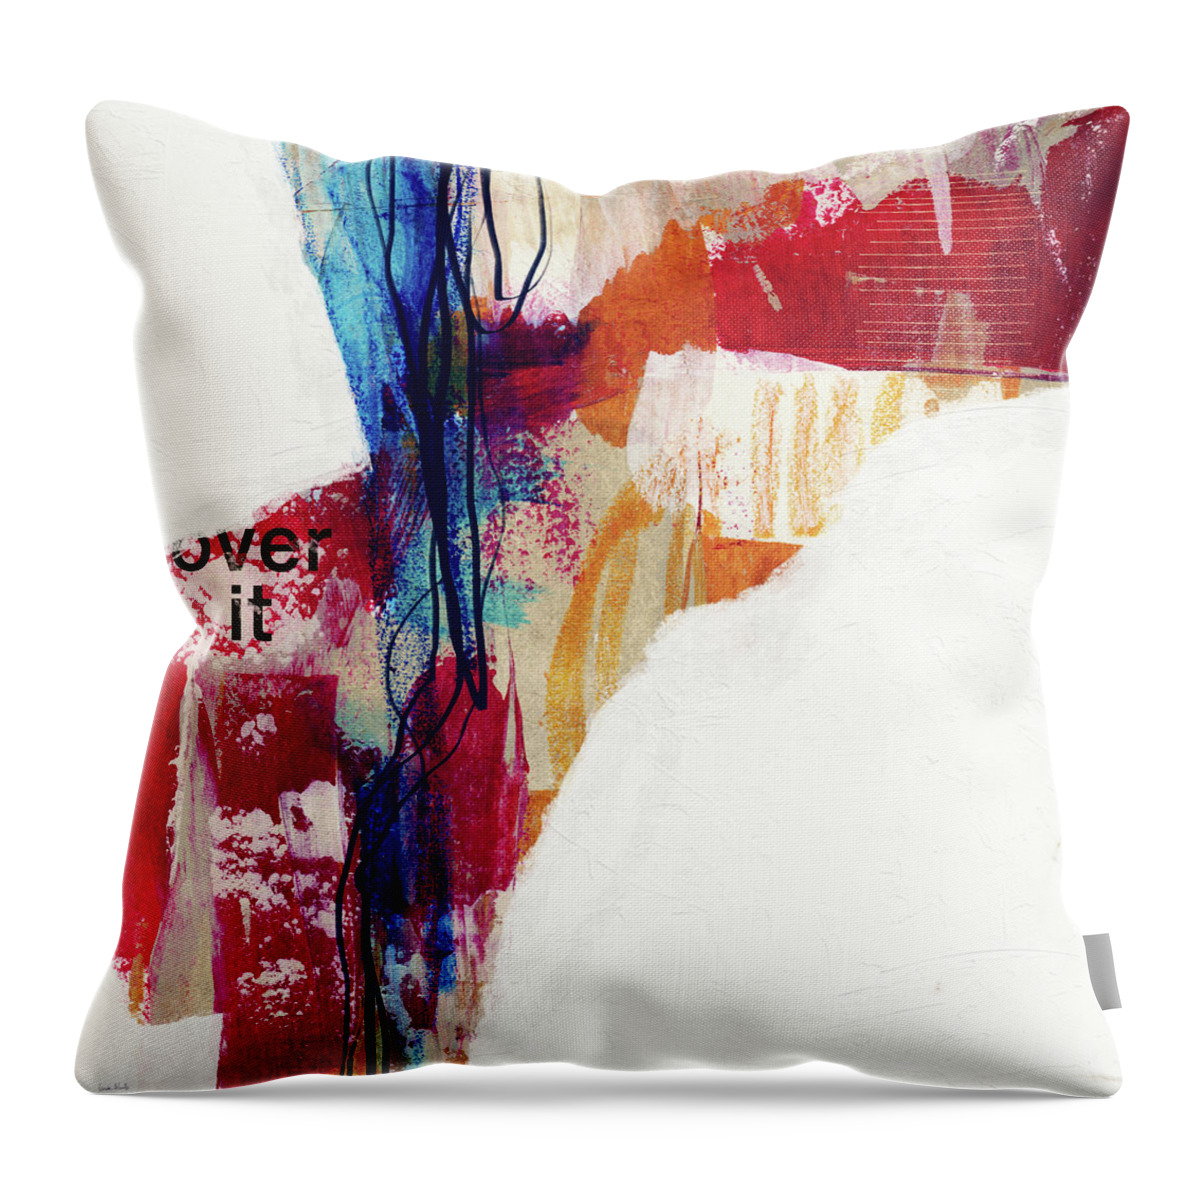 Abstract Throw Pillow featuring the mixed media Over It- Abstract Art by Linda Woods by Linda Woods